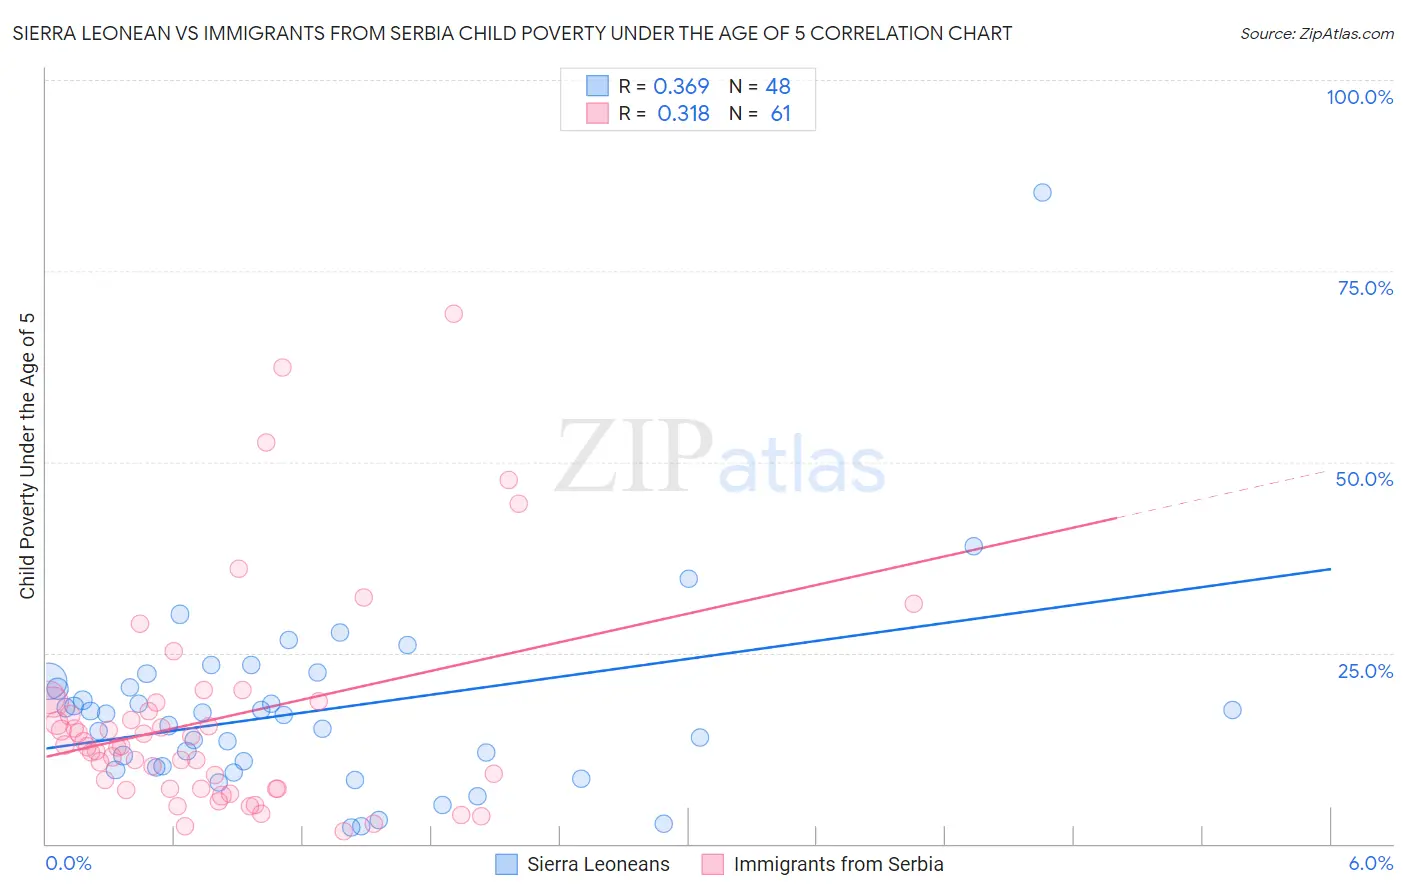 Sierra Leonean vs Immigrants from Serbia Child Poverty Under the Age of 5